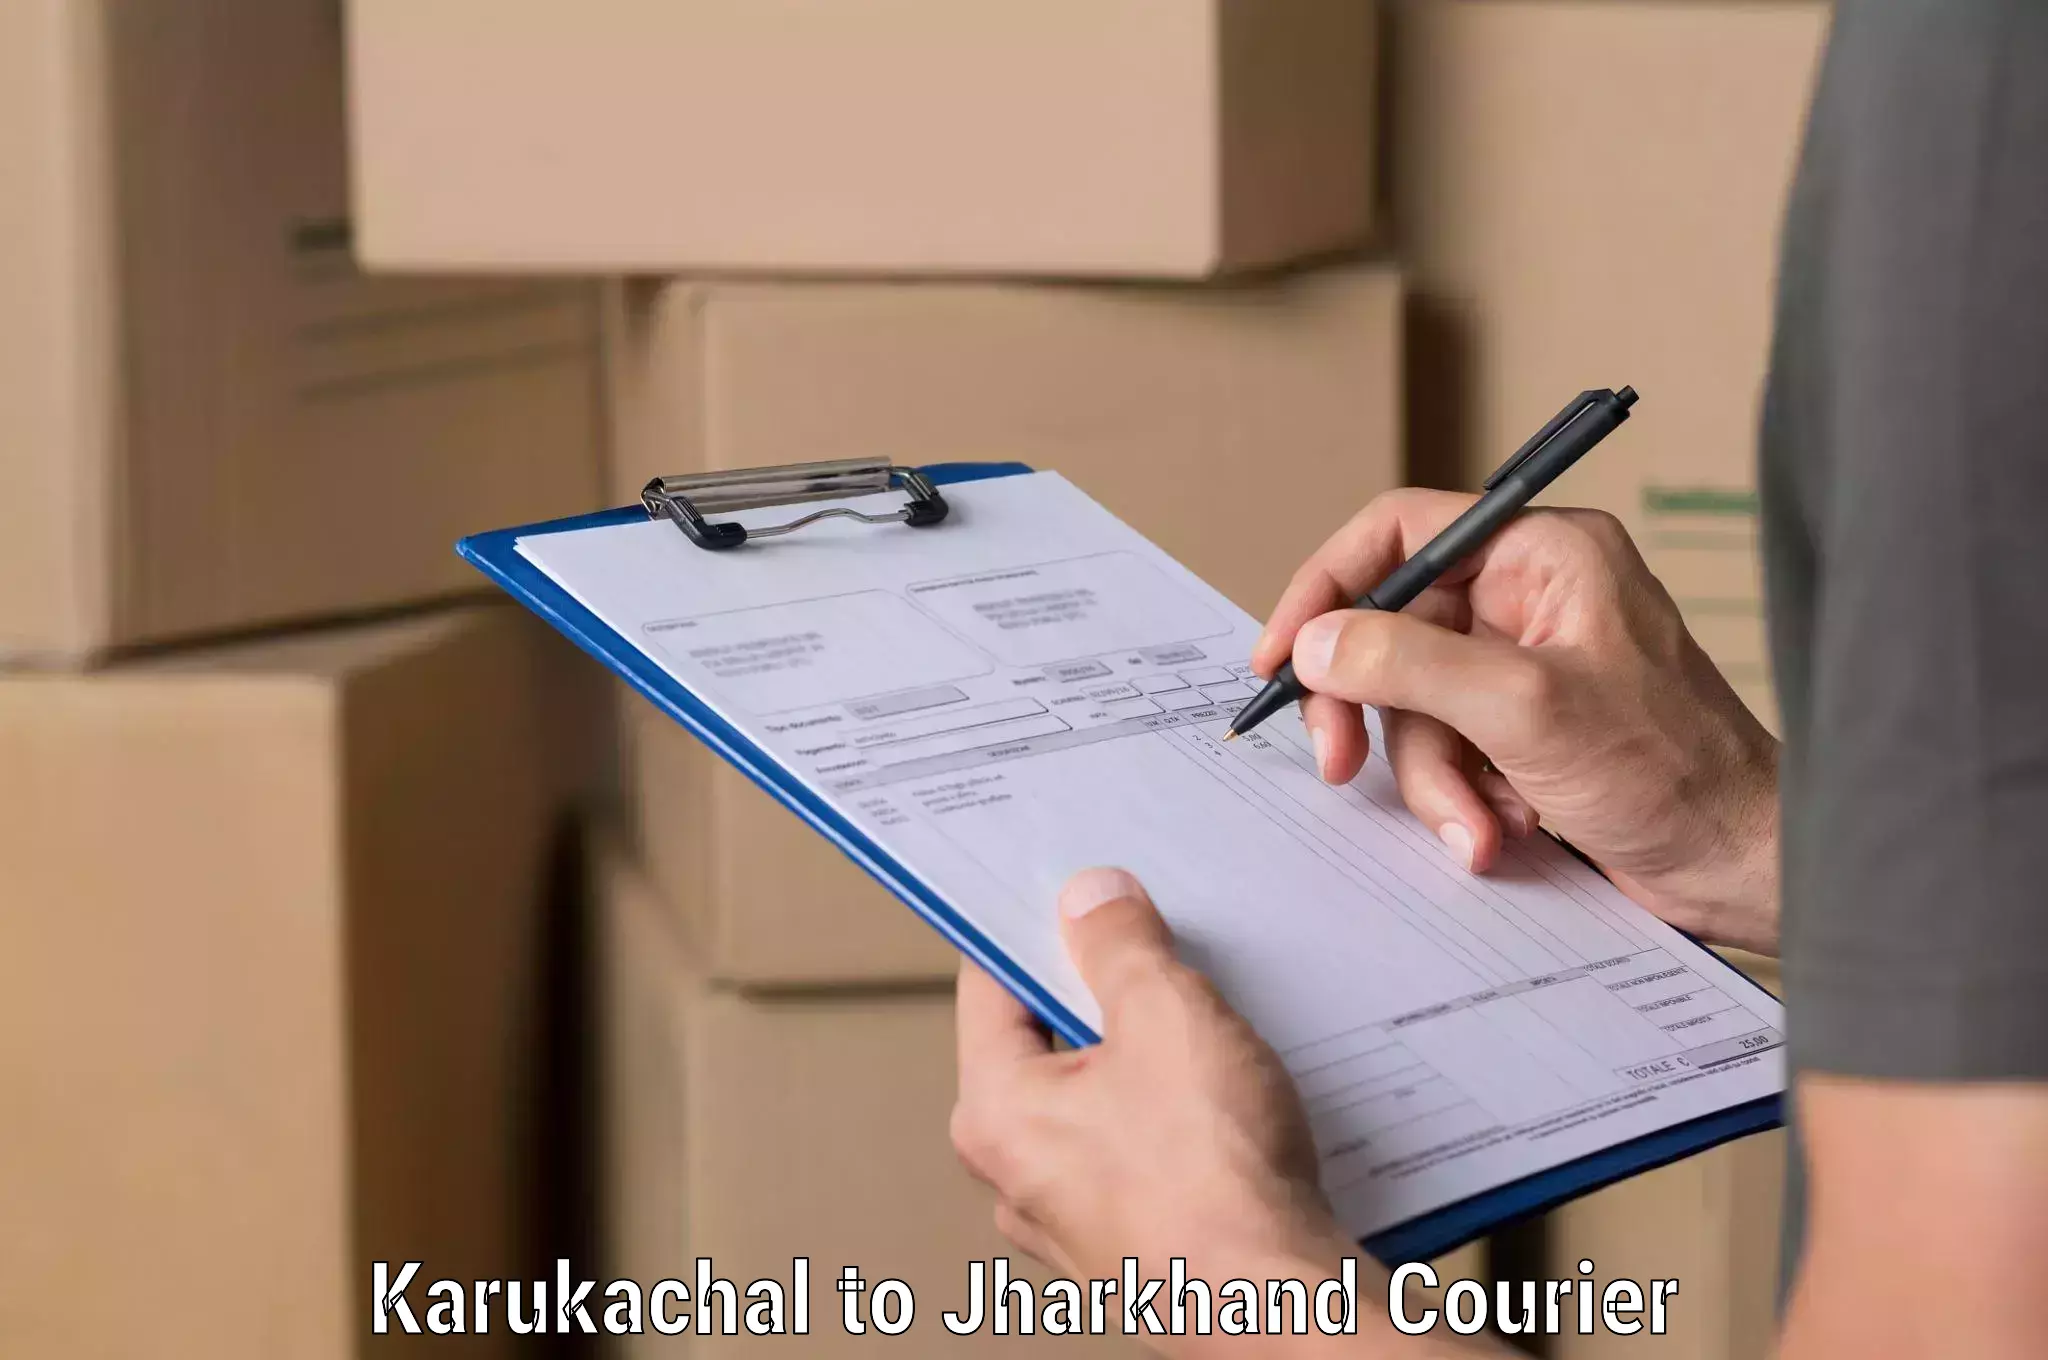 Package delivery network Karukachal to Tandwa